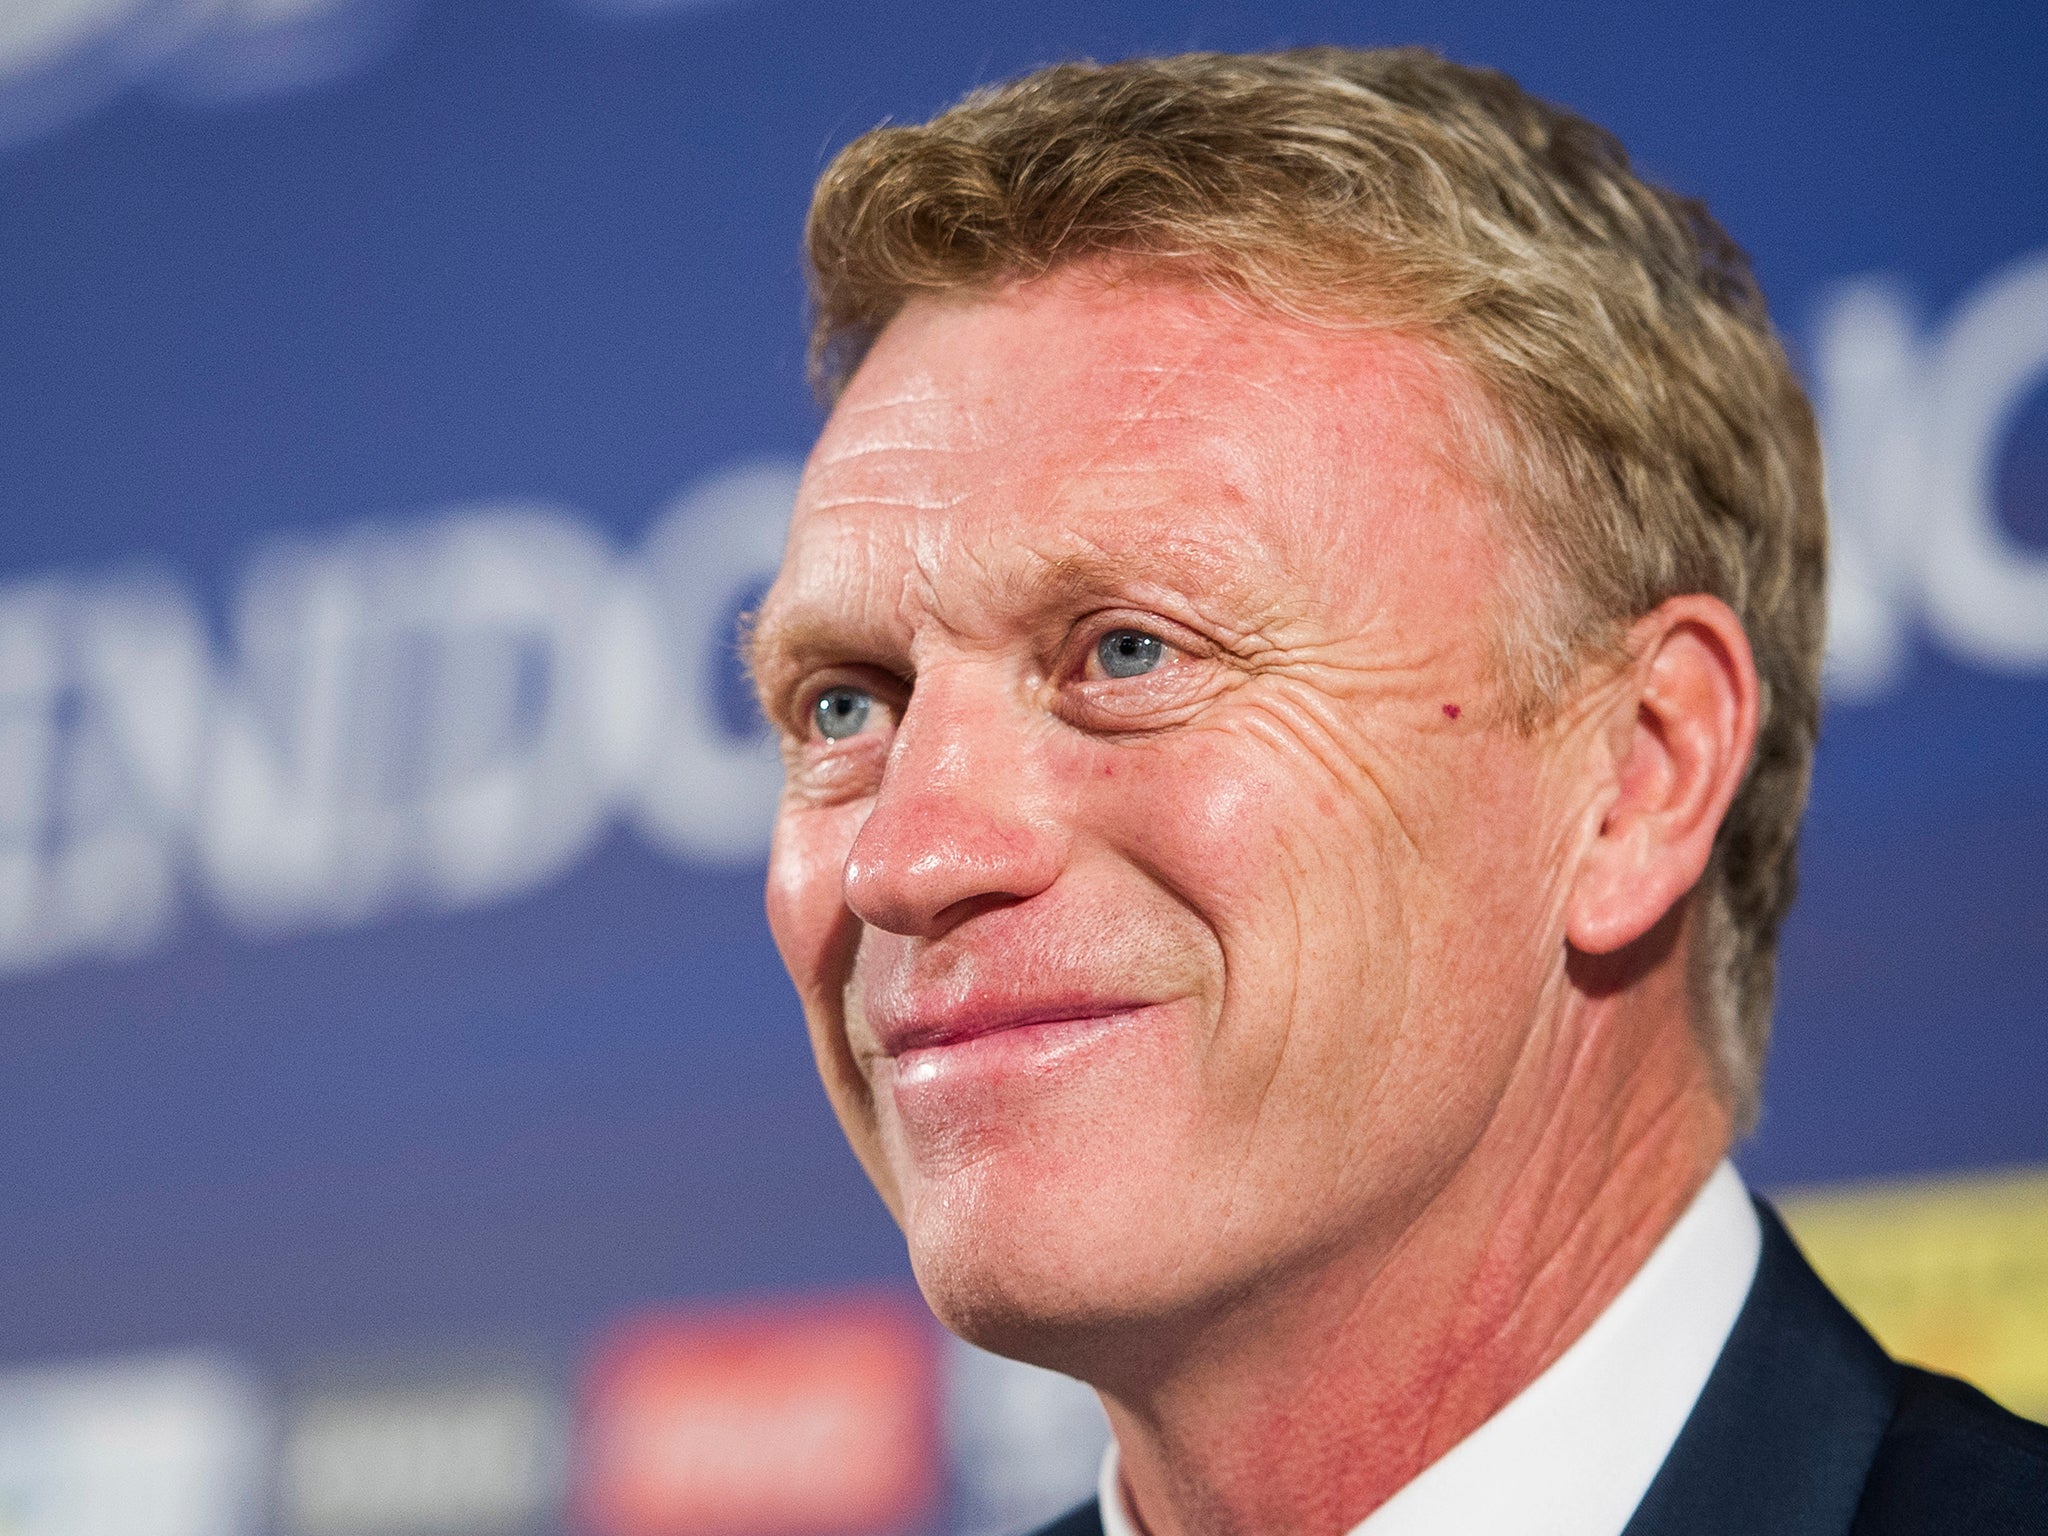 David Moyes was the 'right man' for Manchester United, says Sir Alex ...